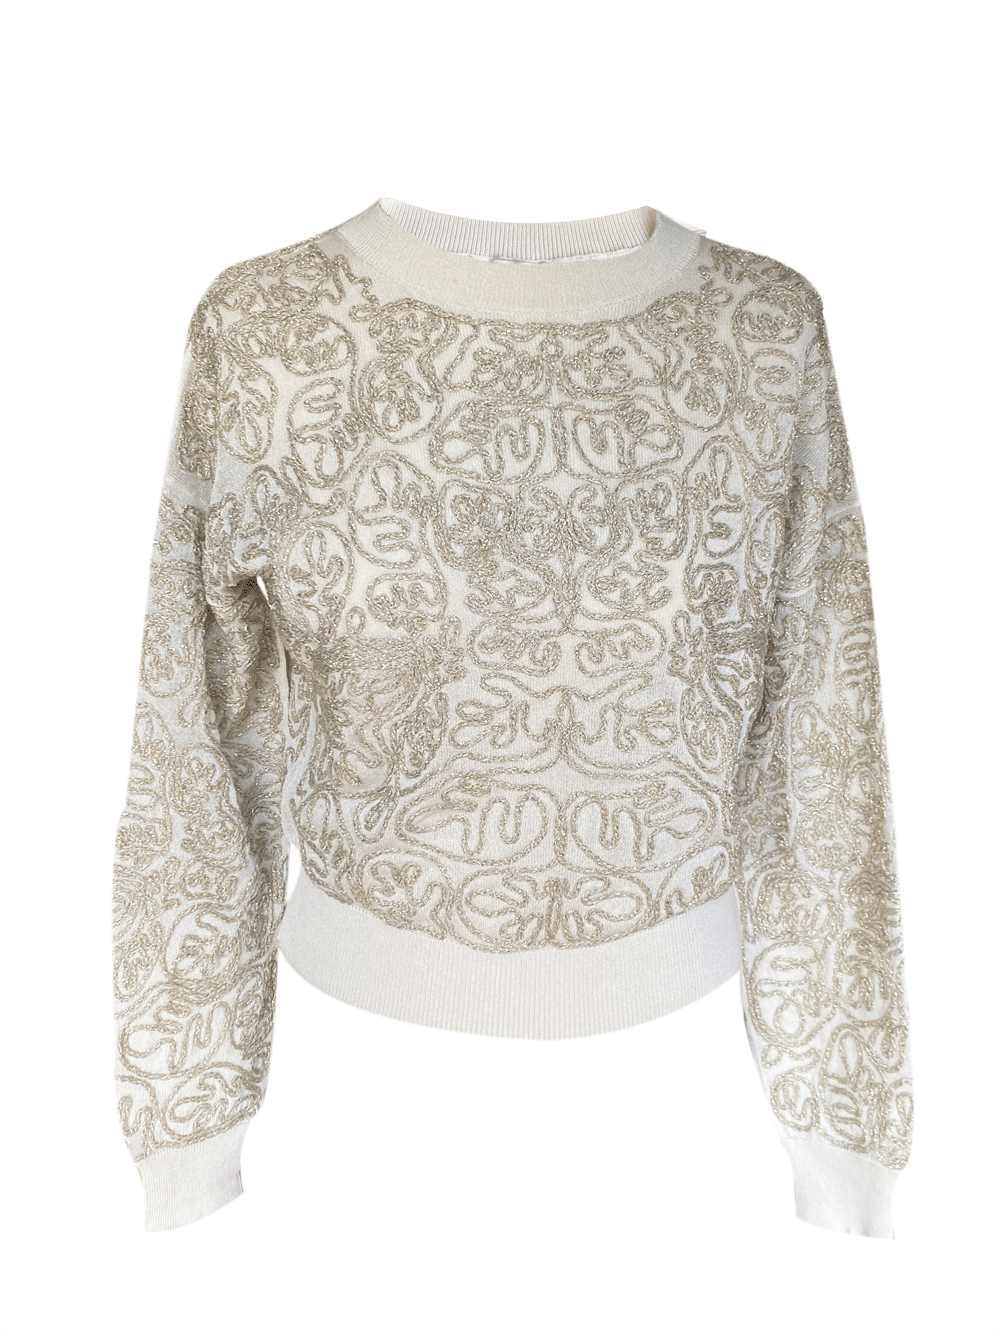 LIU JO Beige sweater with golden embroideries S